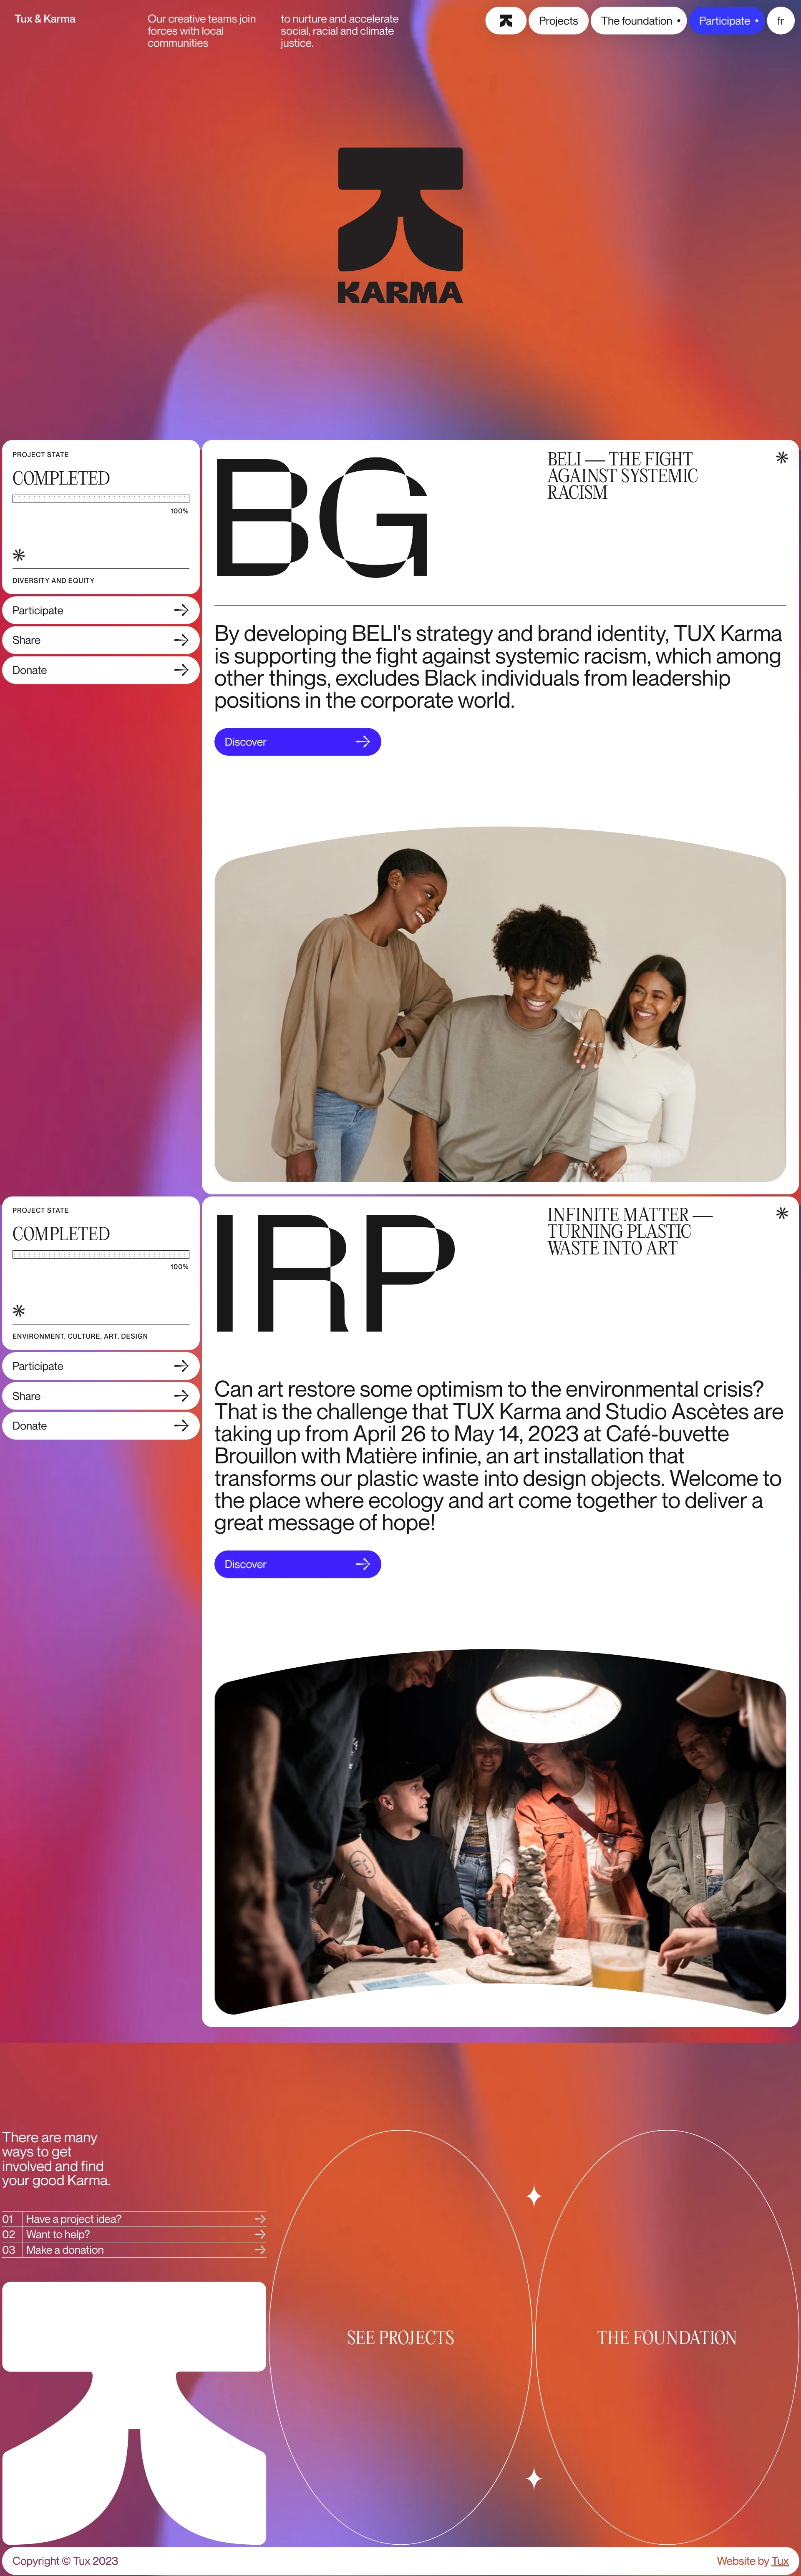 Tux & Karma Landing Page Example: Our creative teams join forces with local communities to promote social, racial and climate justice.